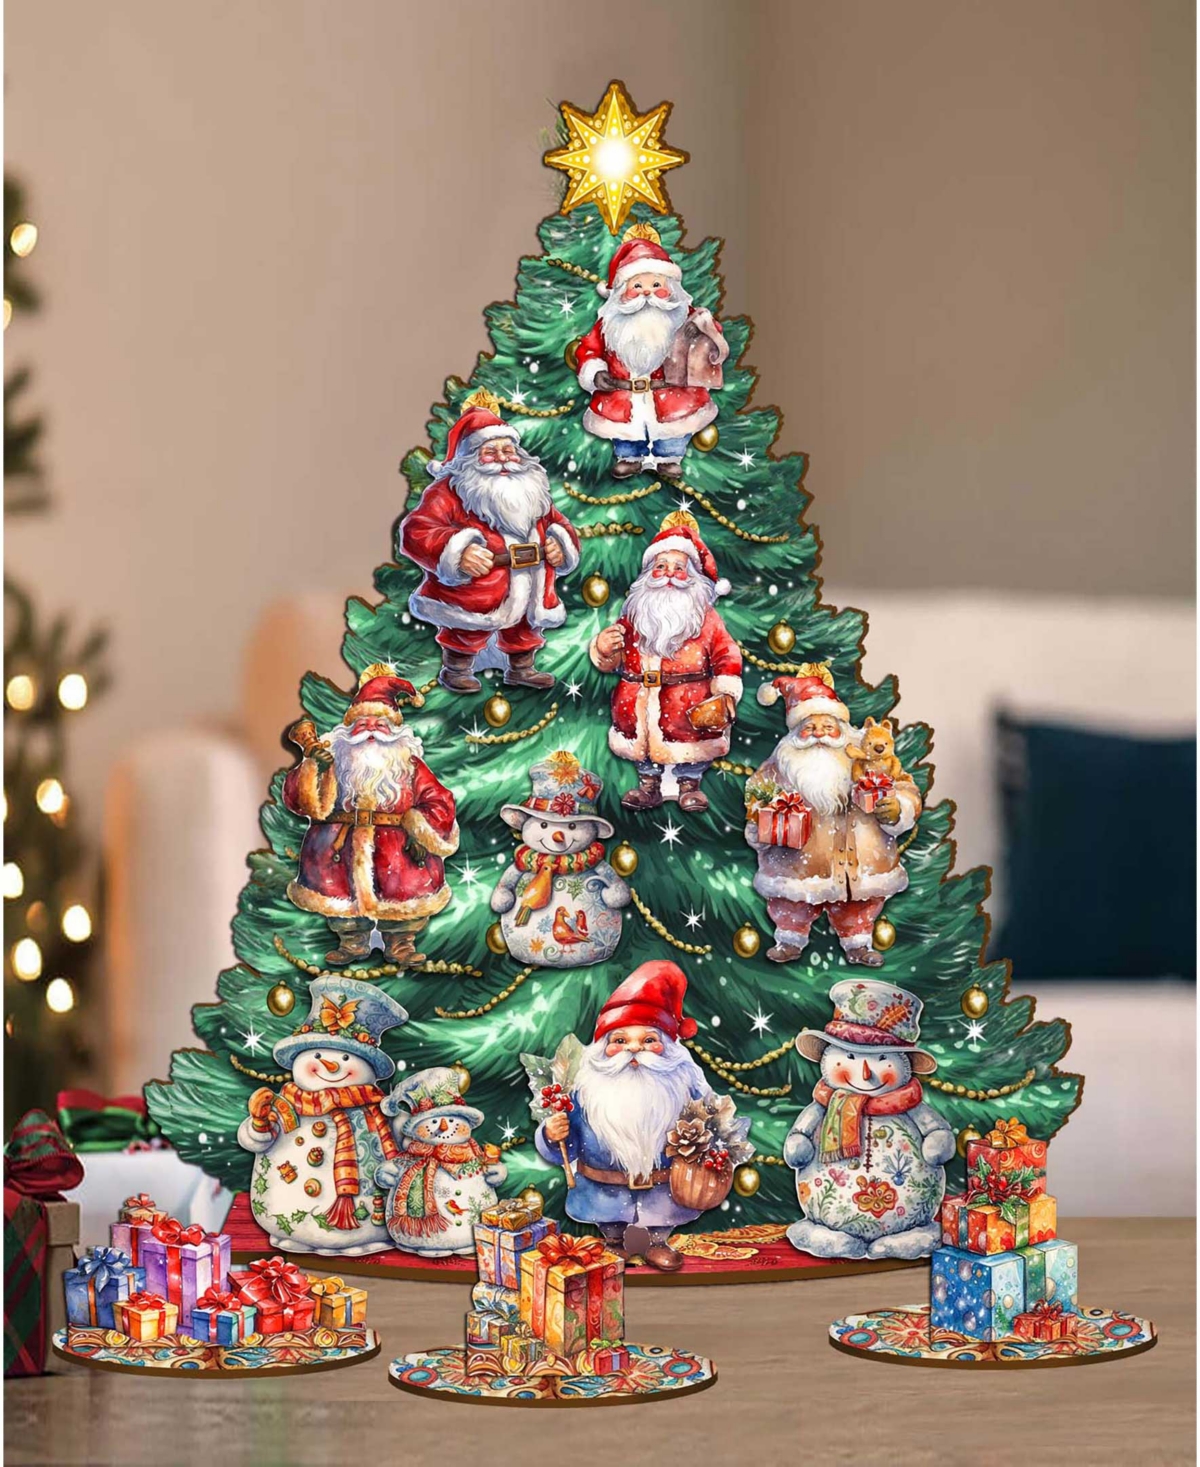 Shop Designocracy Santa Clause Themed Wooden Christmas Tree With Ornaments Set Of 13 G. Debrekht In Multi Color